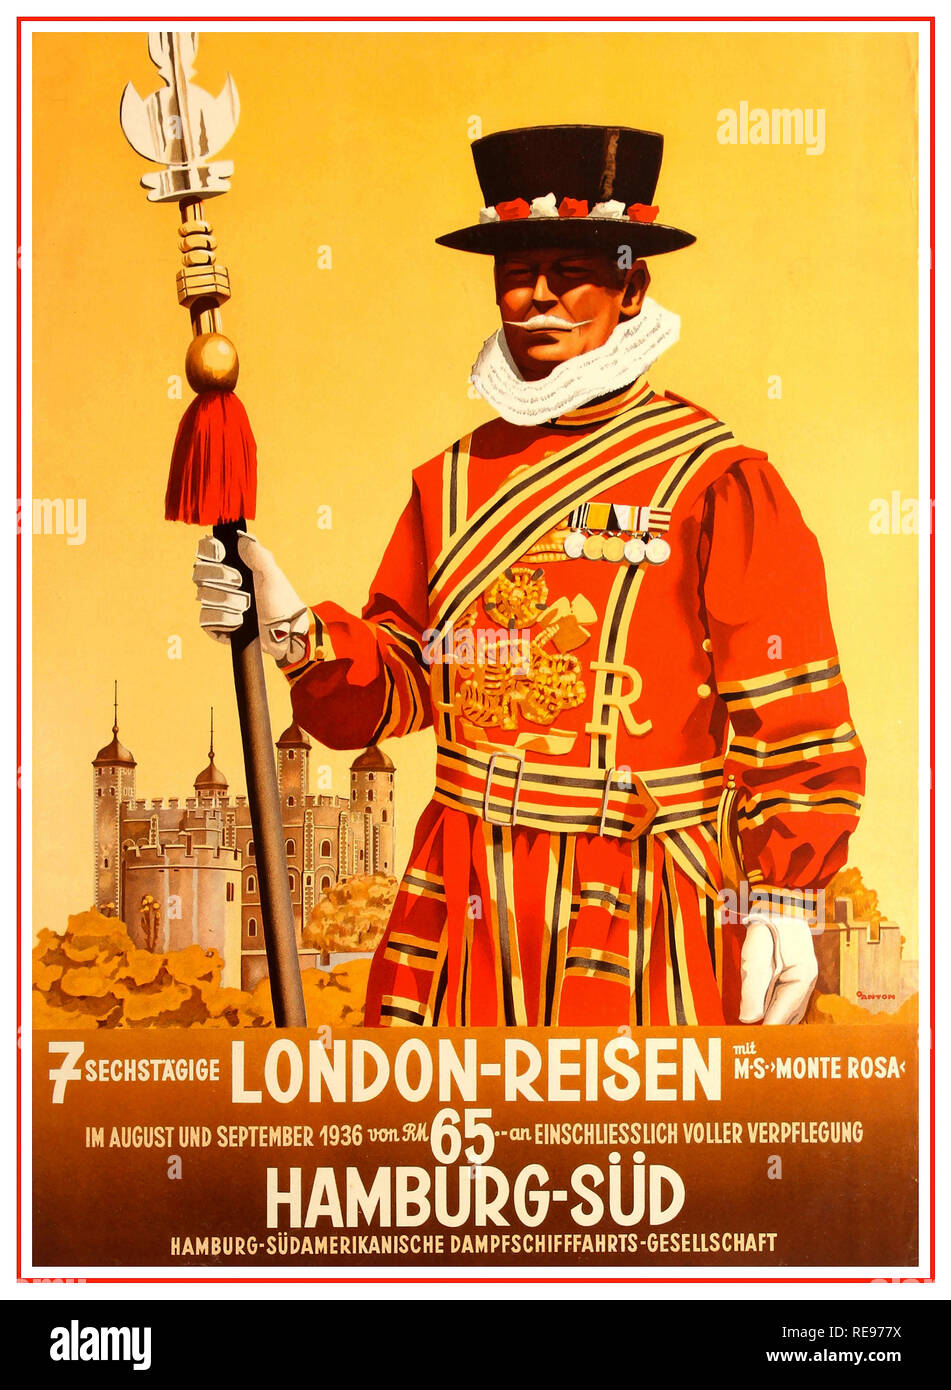 Vintage LONDON 1930’s German REISEN travel poster advertising Seven Day London Travel with M.S. Monte Rosa in August and September 1936 from RM 65 full catering included Hamburg-South Hamburg South America Steamship Company / 7 Sechstagige London-Reisen. Design by the German painter and graphic artist Ottomar Anton (1895-1976) featuring a Beefeater (Yeoman Warder) standing in front of trees and the Tower of London wearing the traditional red and gold coated uniform with medals on his chest. Pre-War Germany 1936. Designer: Ottomar Anton. Stock Photo